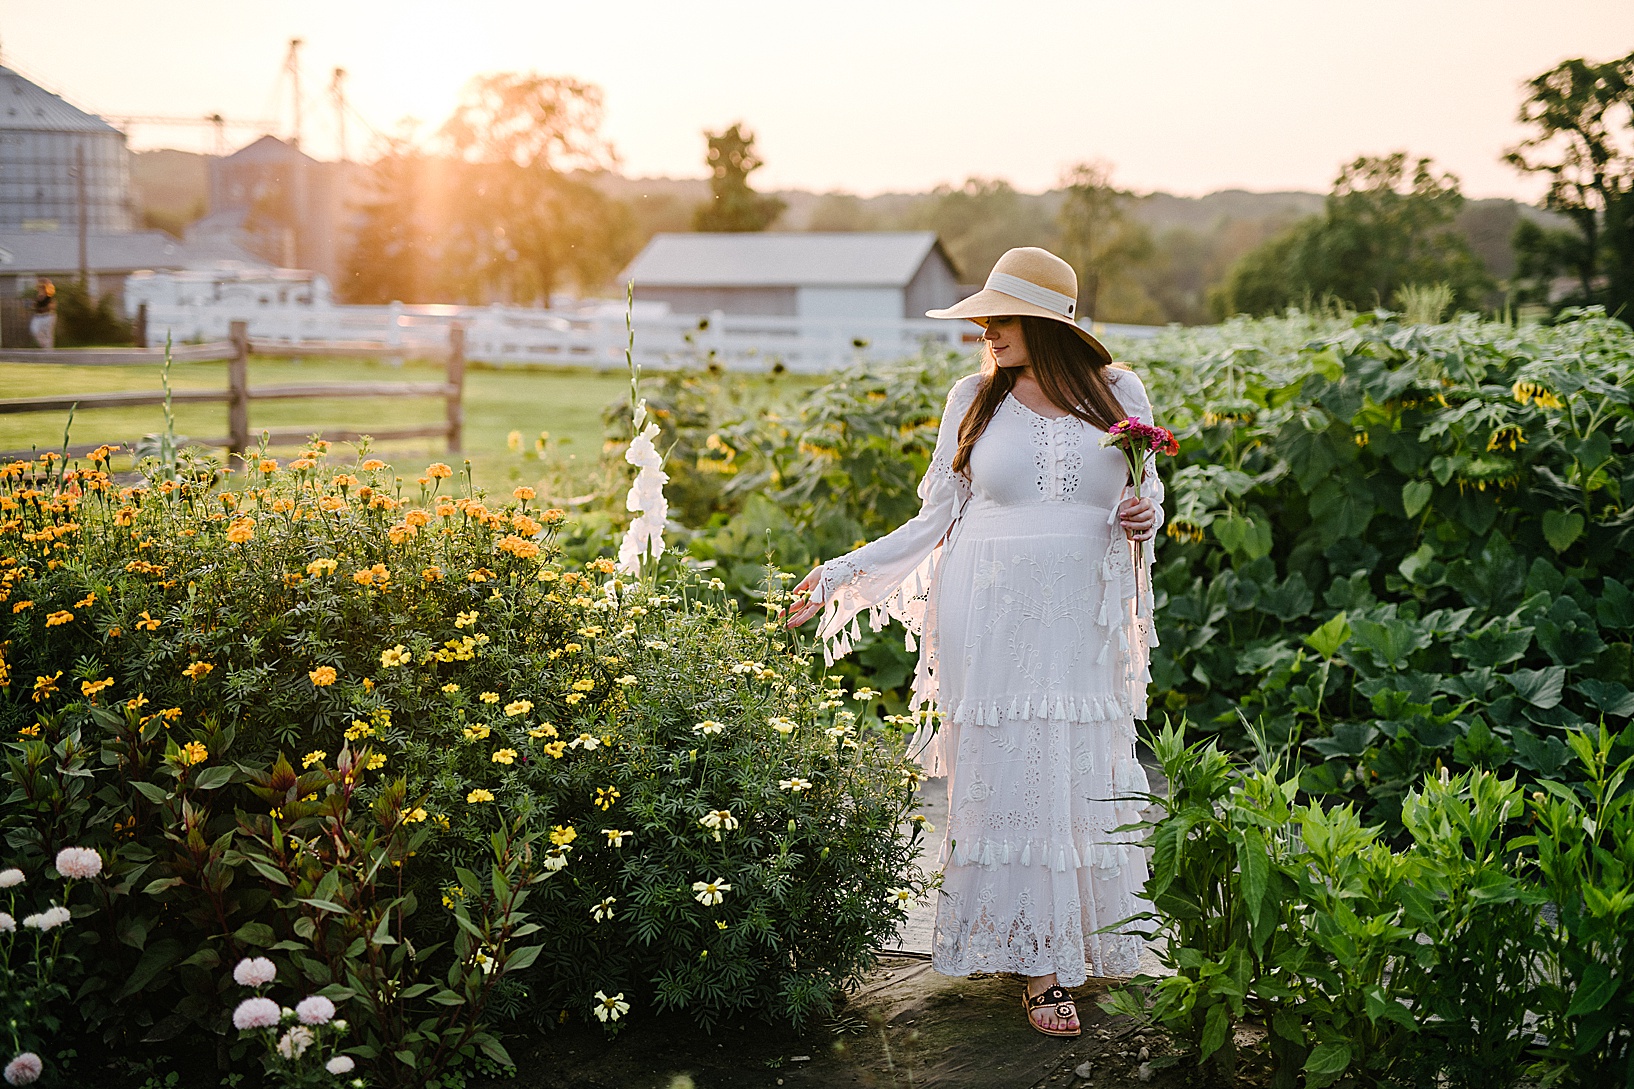 Pregnant woman in white Fillyboo gown and sun hat walks through rows of wildflowers